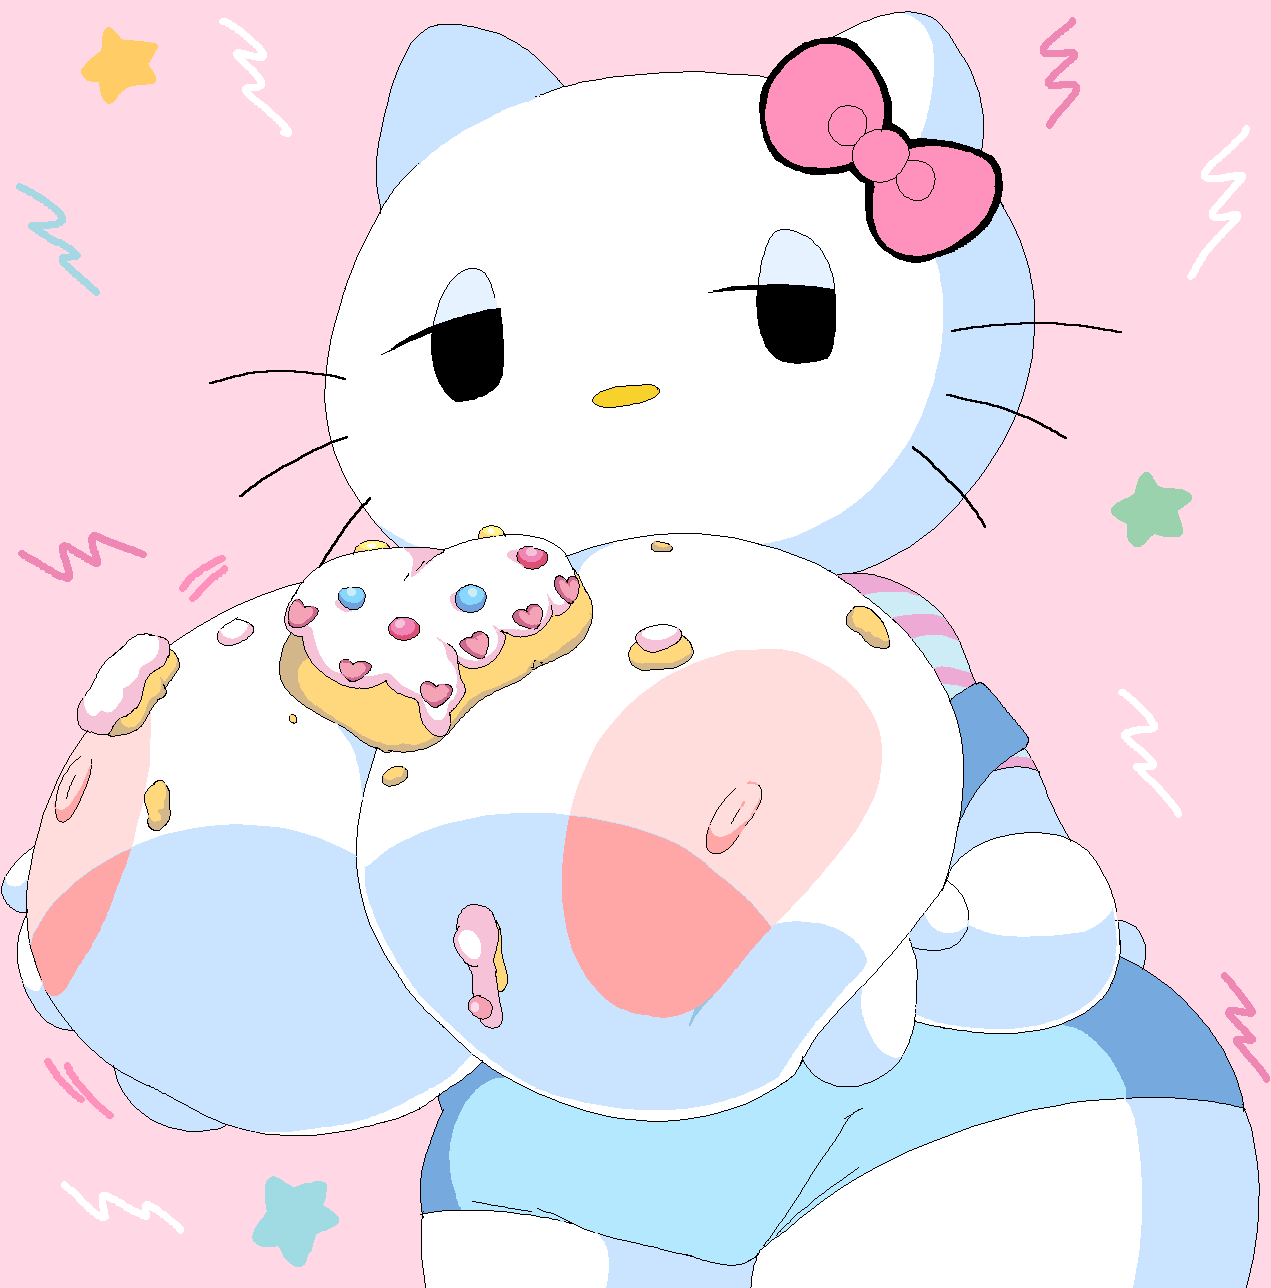 1girls big_boobs big_breasts boobs breasts cassettedream dessert dream-cassette female female_only food_play hello_kitty hello_kitty_(character) hello_kitty_(series) hoshime huge_boobs huge_breasts kitty_white sanrio solo solo_female tagme